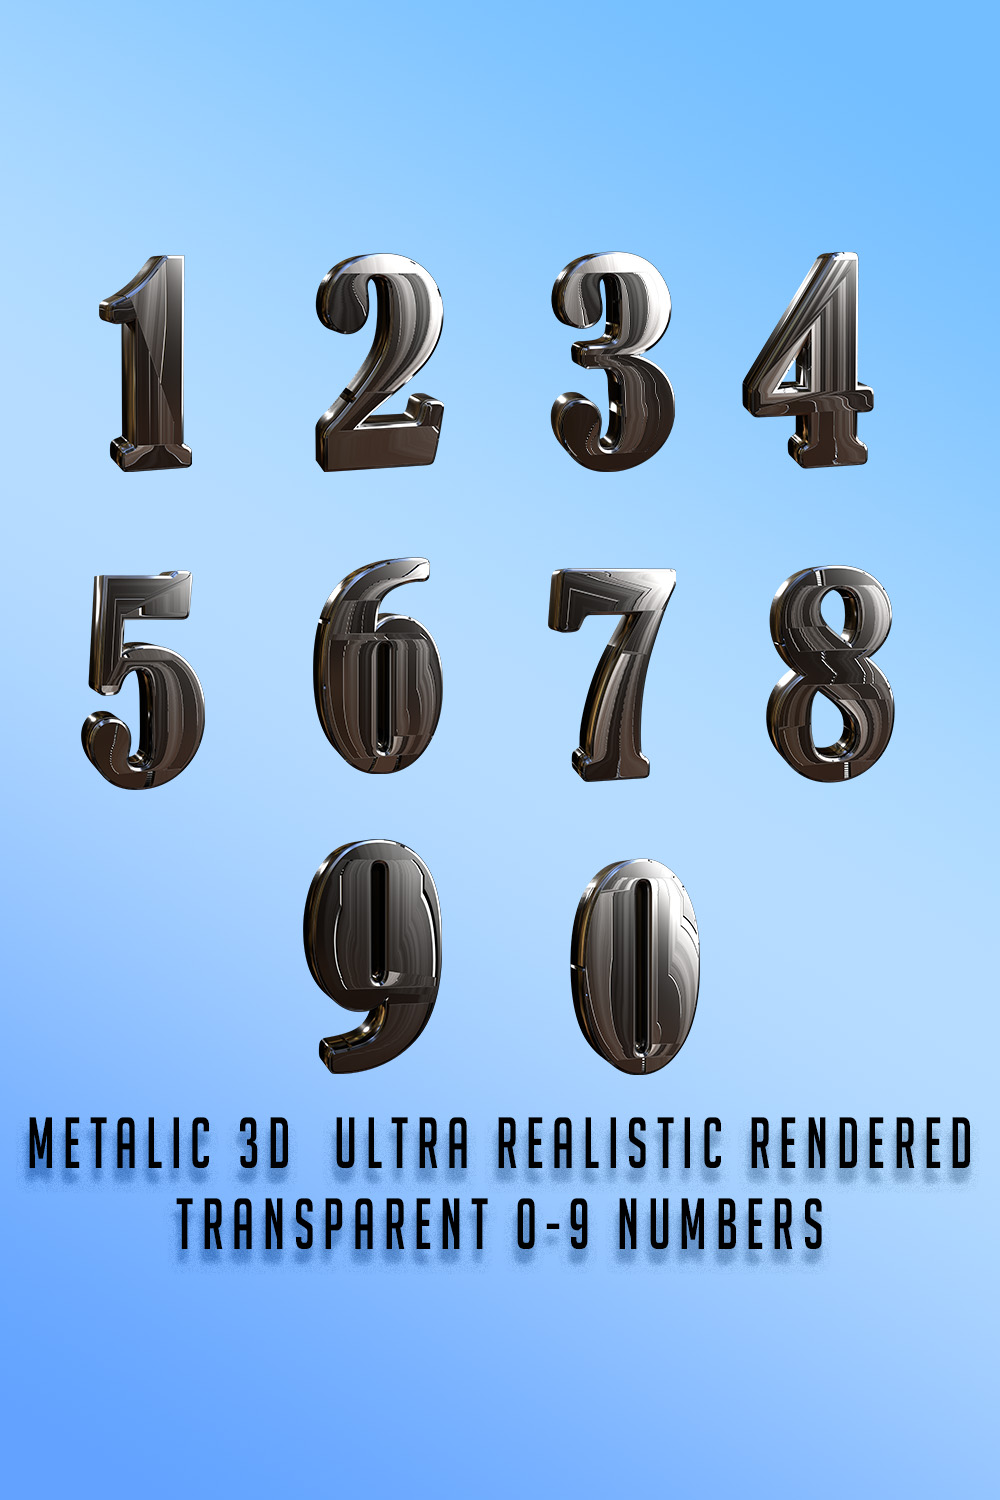 Ultra Realistic Metallic 3D Rendered Futuristic 0-9 Numbers In PNG with Transparent Background pinterest preview image.